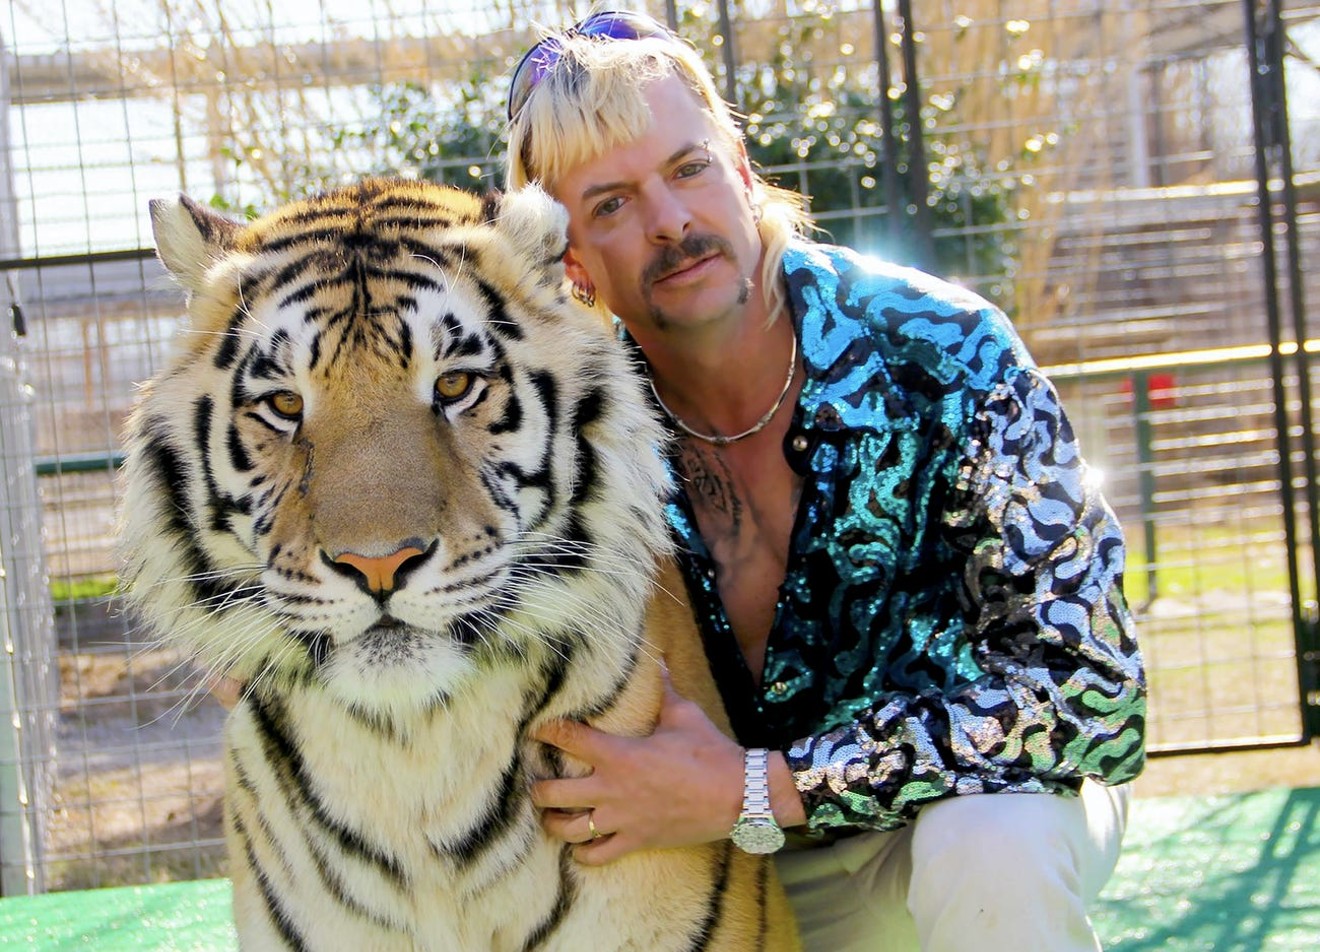 The Tiger King, Joe Exotic, left a memorable impression in Dallas, where he lived briefly.